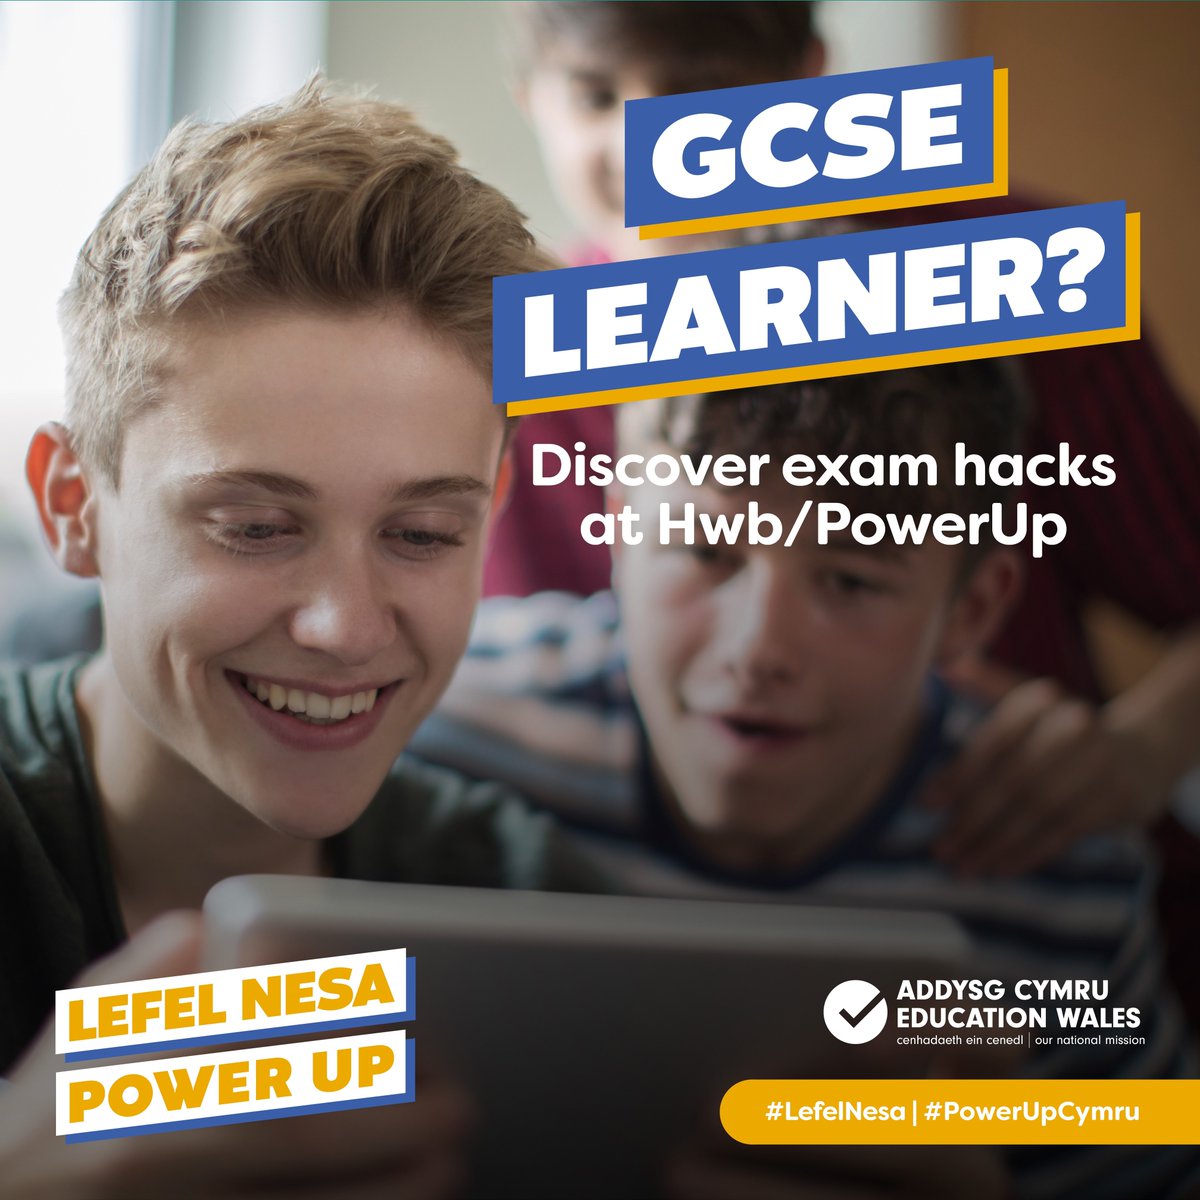 Give yourself the best chance at acing your exams.  

Head on over to  orlo.uk/C6kw6 to access revision resources and support. 

#PowerUpCymru